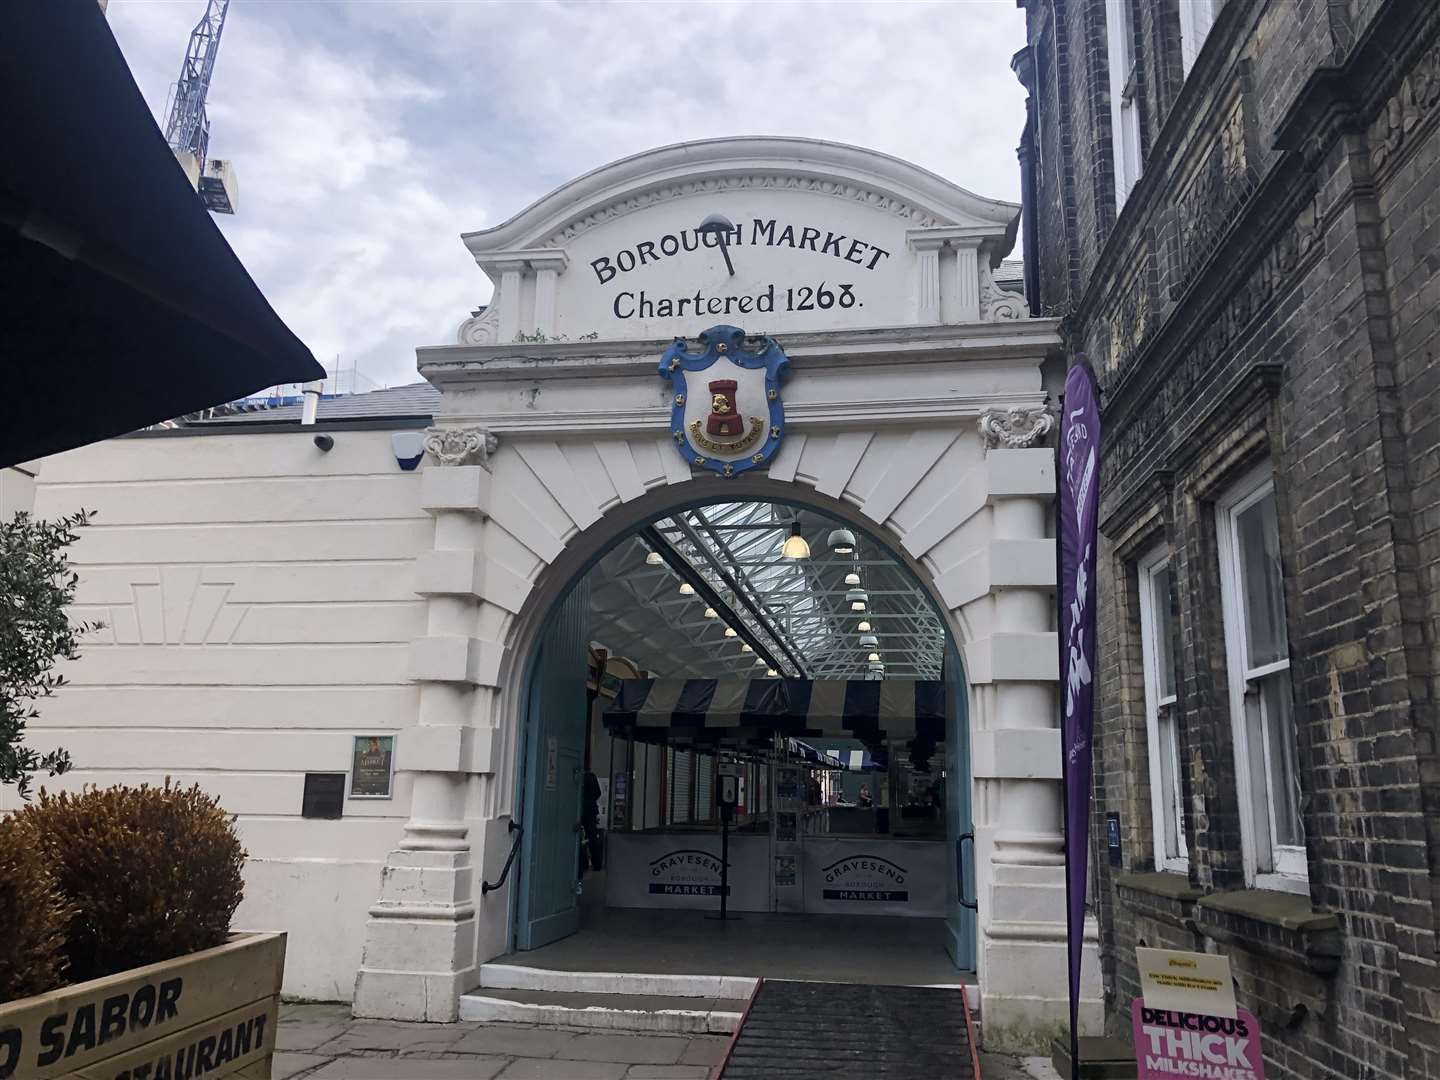 Gravesend Borough Market was given the Royal Charter in 1268